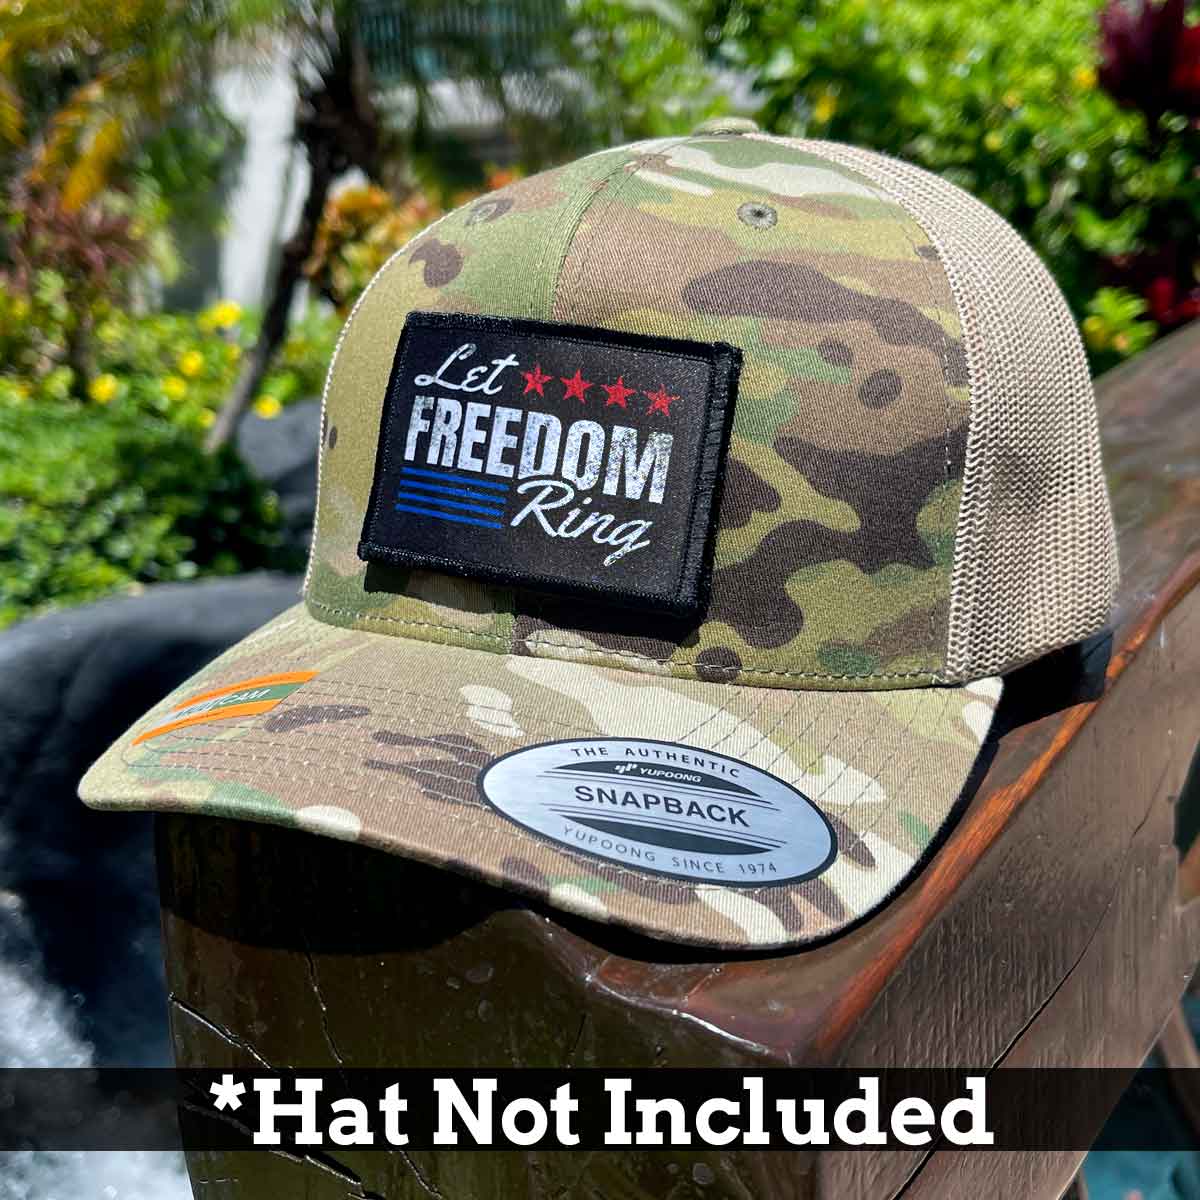 Let Freedom Ring - Removable Patch - Pull Patch - Removable Patches For Authentic Flexfit and Snapback Hats